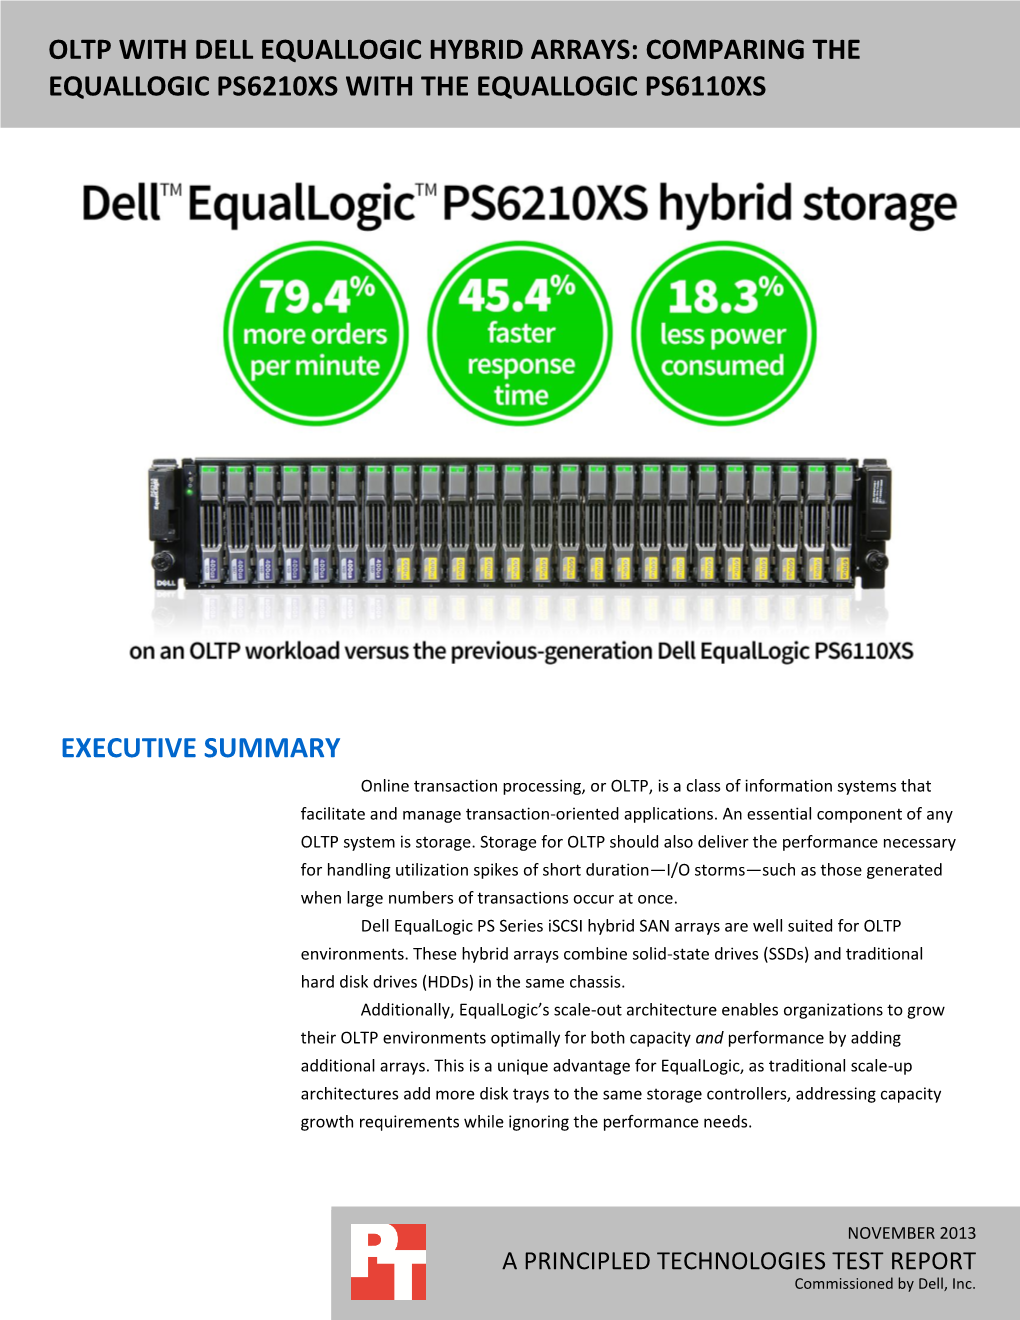 OLTP with Dell Hybrid Arrays: Comparing the Equallogic